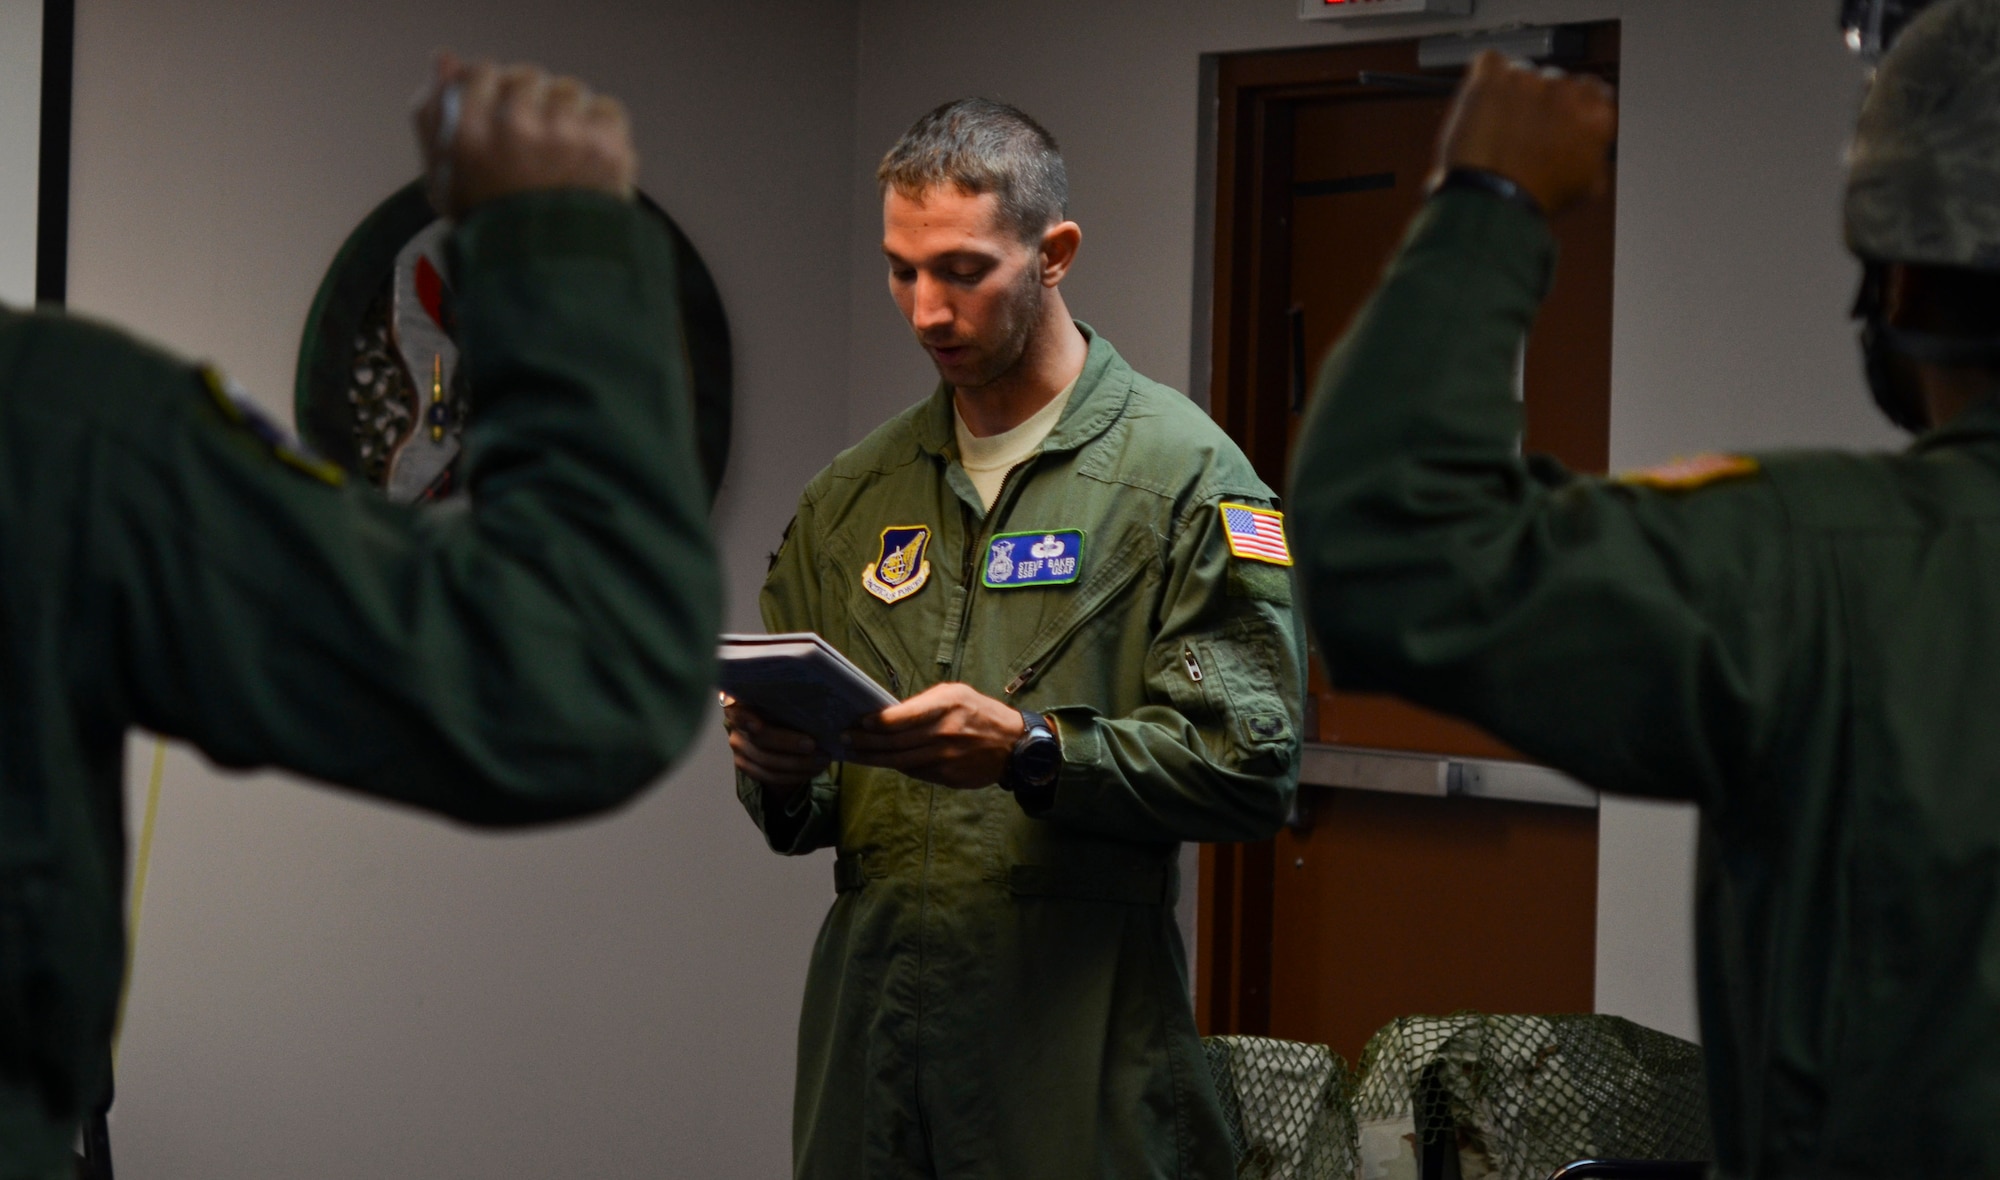 Staff Sgt. Stephen Baker, 736th Security Forces Squadron parachute program manager, briefs Airmen on procedures and safety precautions Aug. 21 before a static line jump on Andersen Air Force Base, Guam. The day of training, the jumpers receive standardized airborne training, starting with a briefing from the jumpmasters. (U.S. Air Force photo by Airman 1st Class Marianique Santos/Released)